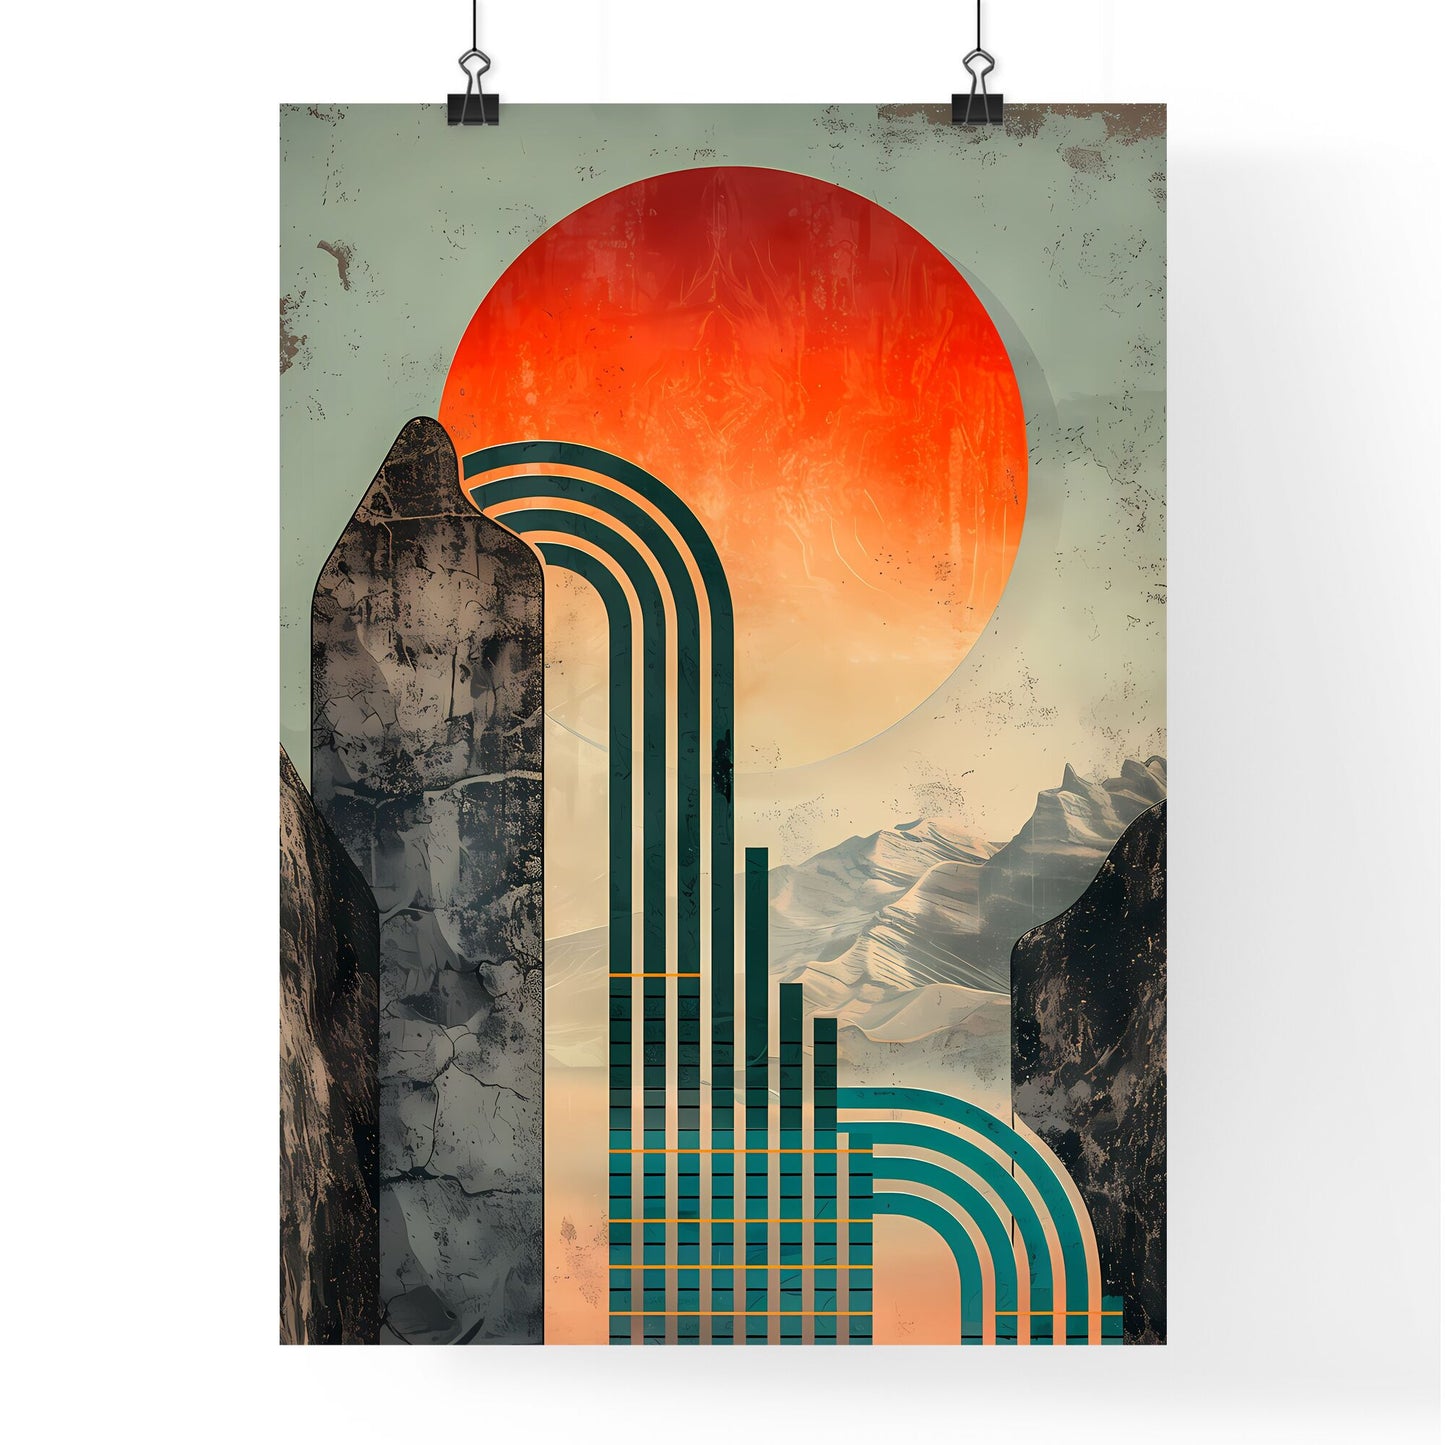 Vibrant Vintage Poster-Style Painting: Flowing Lines, Metallic Rectangles, Warmcore, Stimwave, Mesopotamian Art Inspired Mountains and Sun Default Title